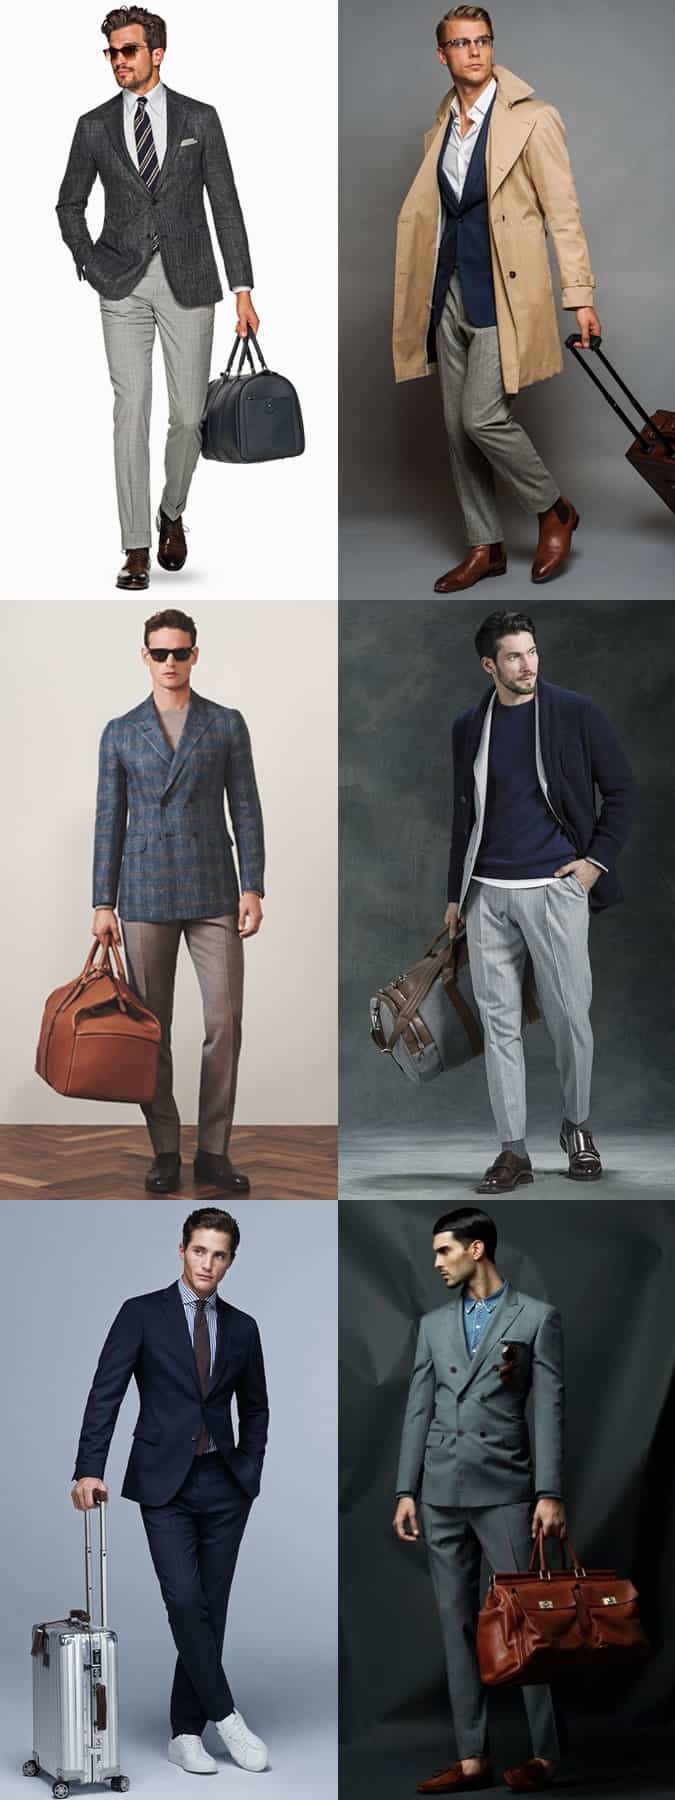 Men's Carry On Luggage Business Travel Outfit Inspiration Lookbook